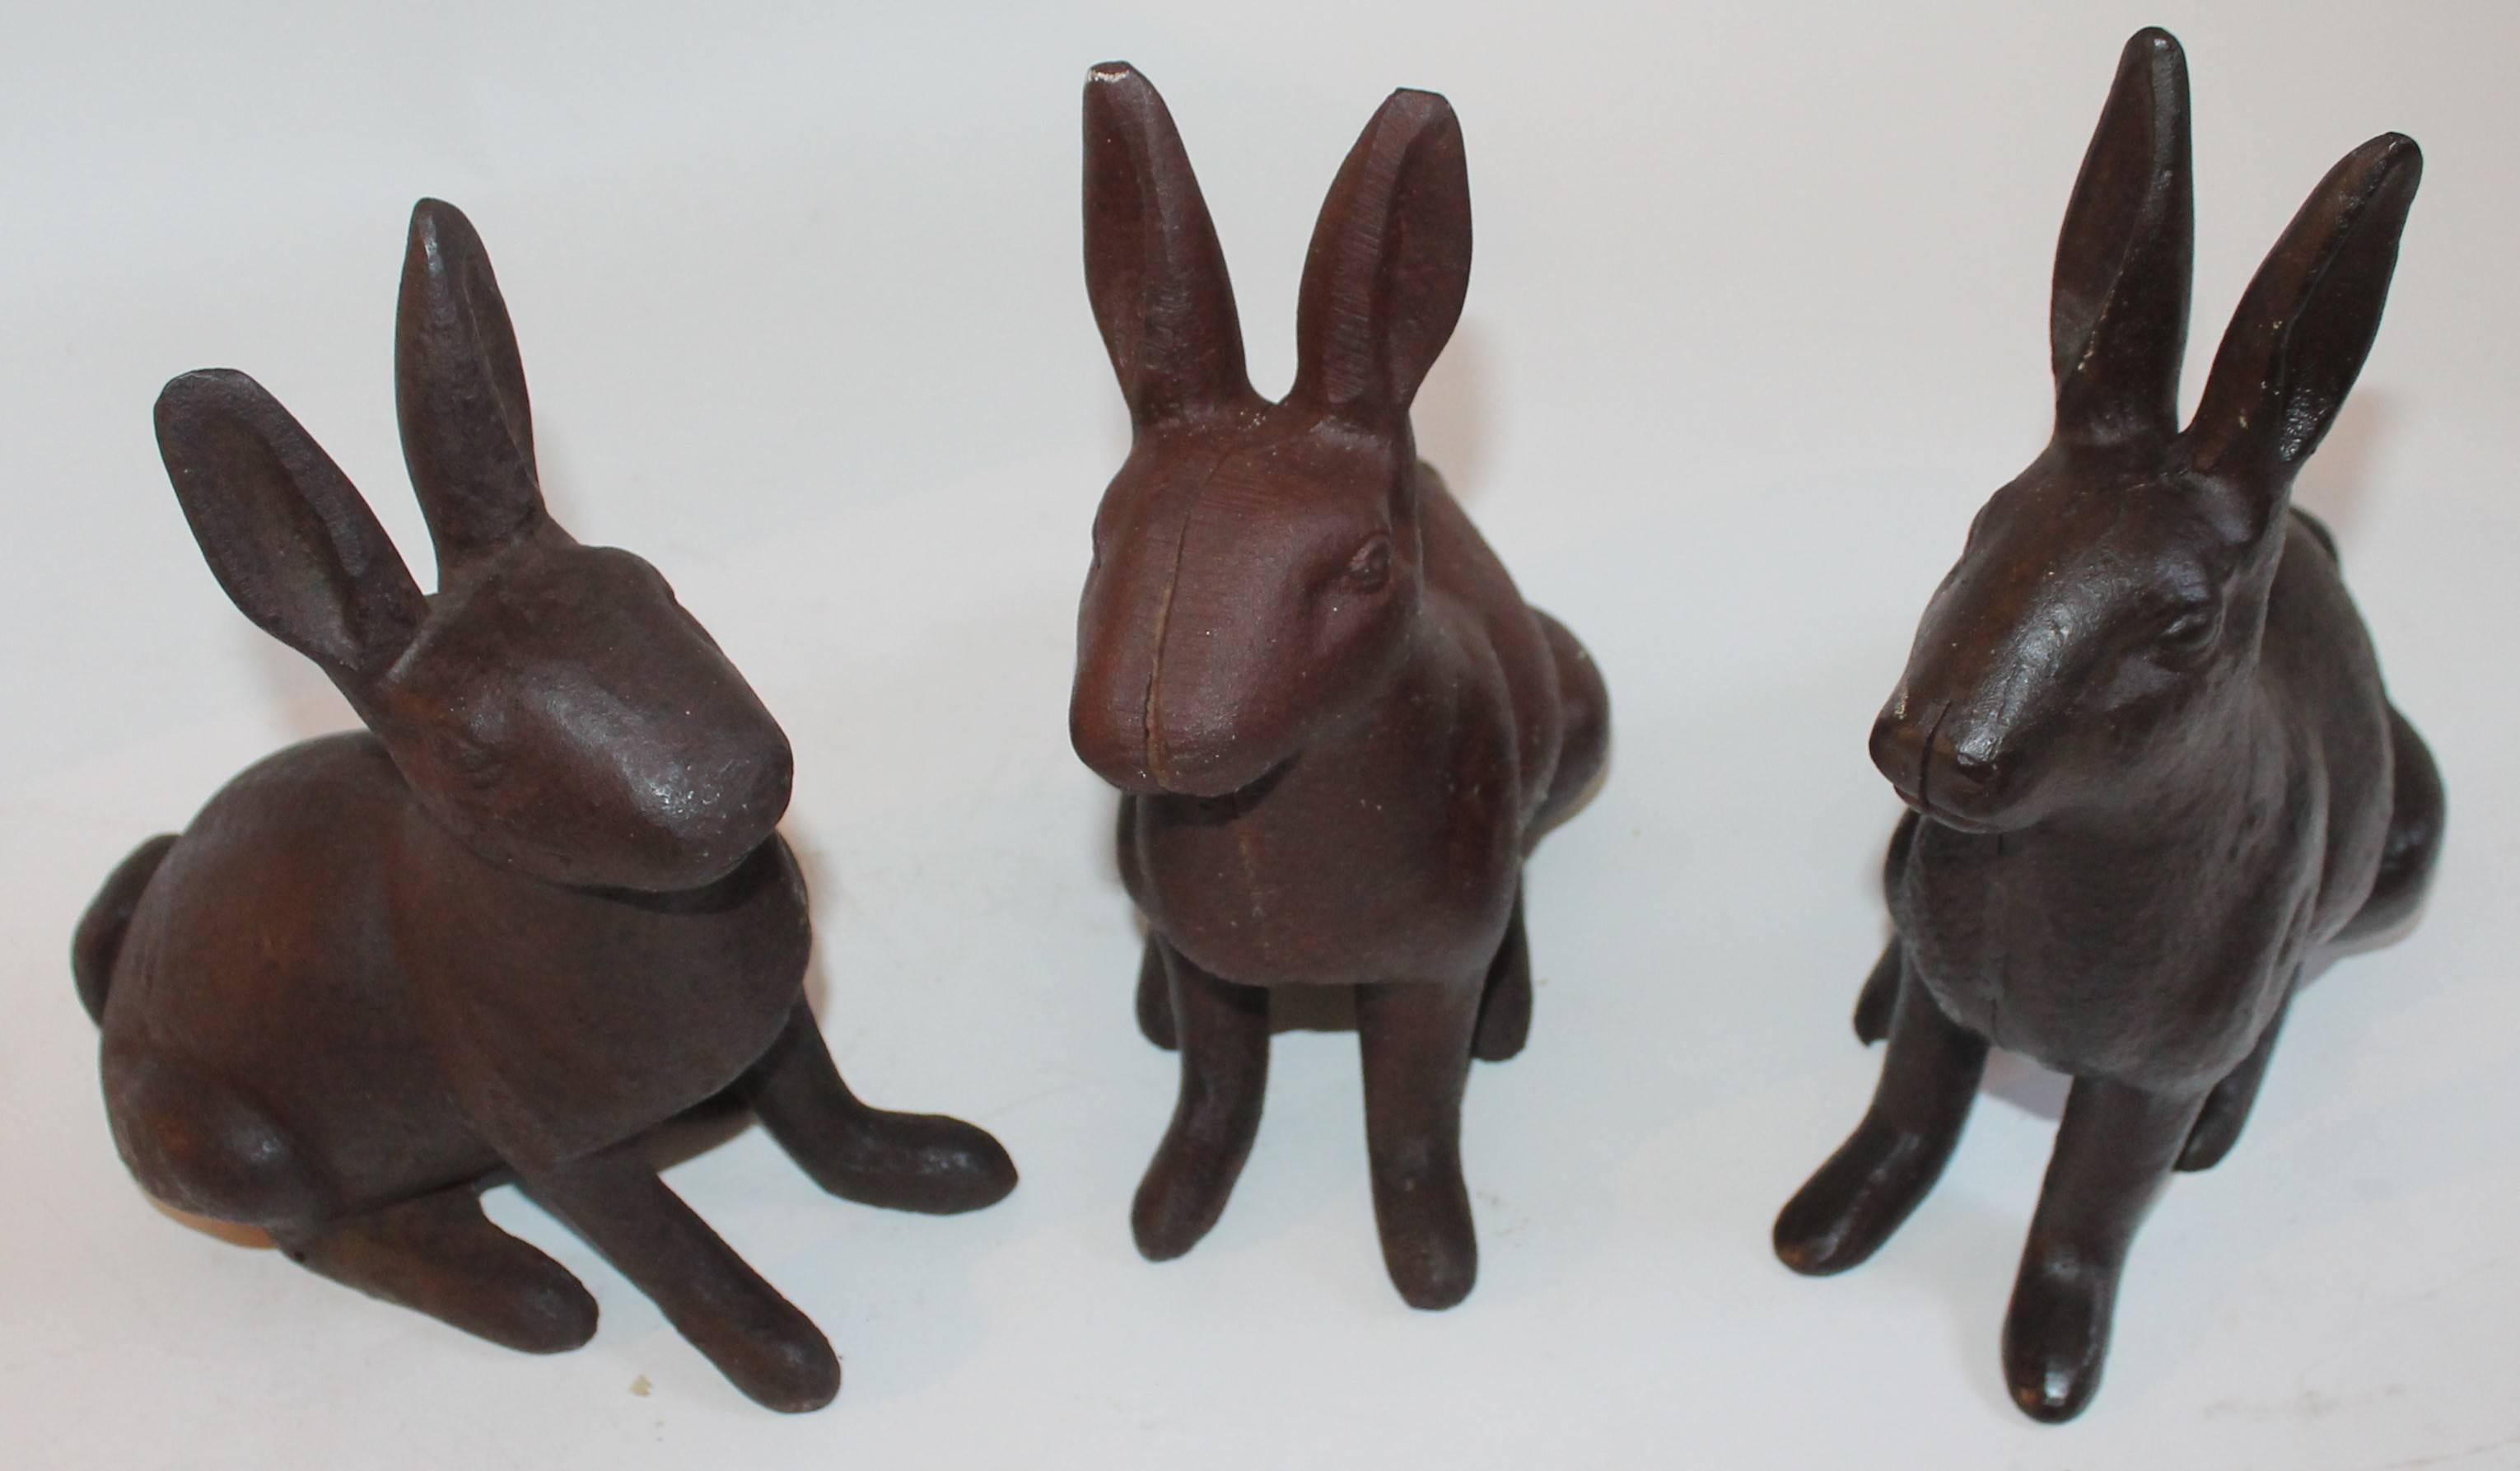 These rabbits are all slightly different in shape and size. All rabbits measure 10 inches in depth x 5 inches in width x 11 inches in height. The condition are very good.